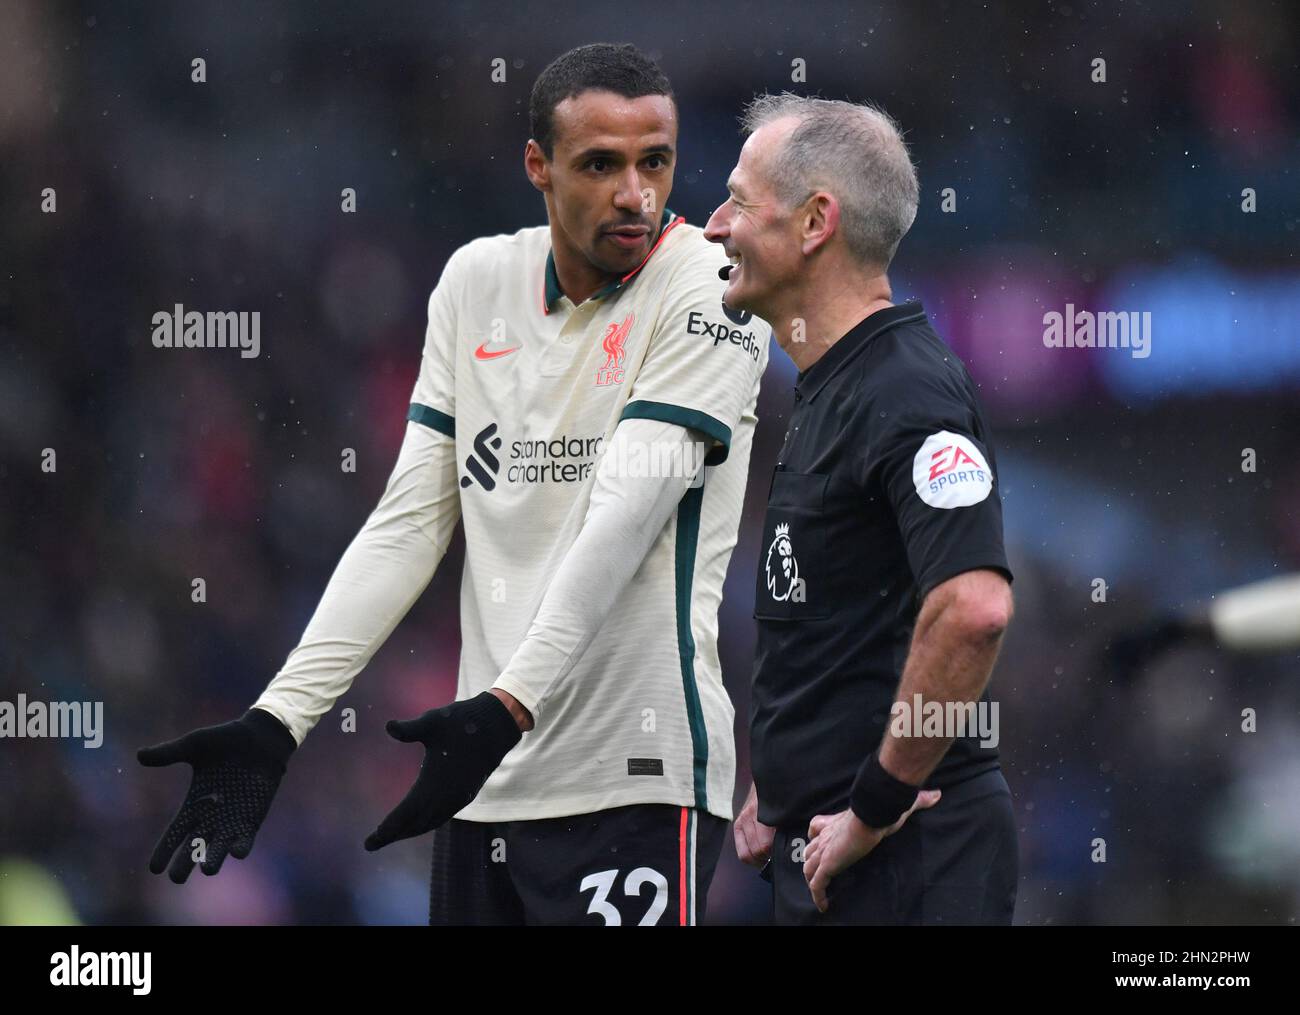 Burnley, UK. 13th Feb, 2022. Liverpool's Joel Matip speaks with Match referee Martin Atkinson during the Premier League match at Turf Moor, Burnley, UK. Picture date: Sunday February 13, 2022. Photo credit should read: Anthony Devlin Credit: Anthony Devlin/Alamy Live News Stock Photo